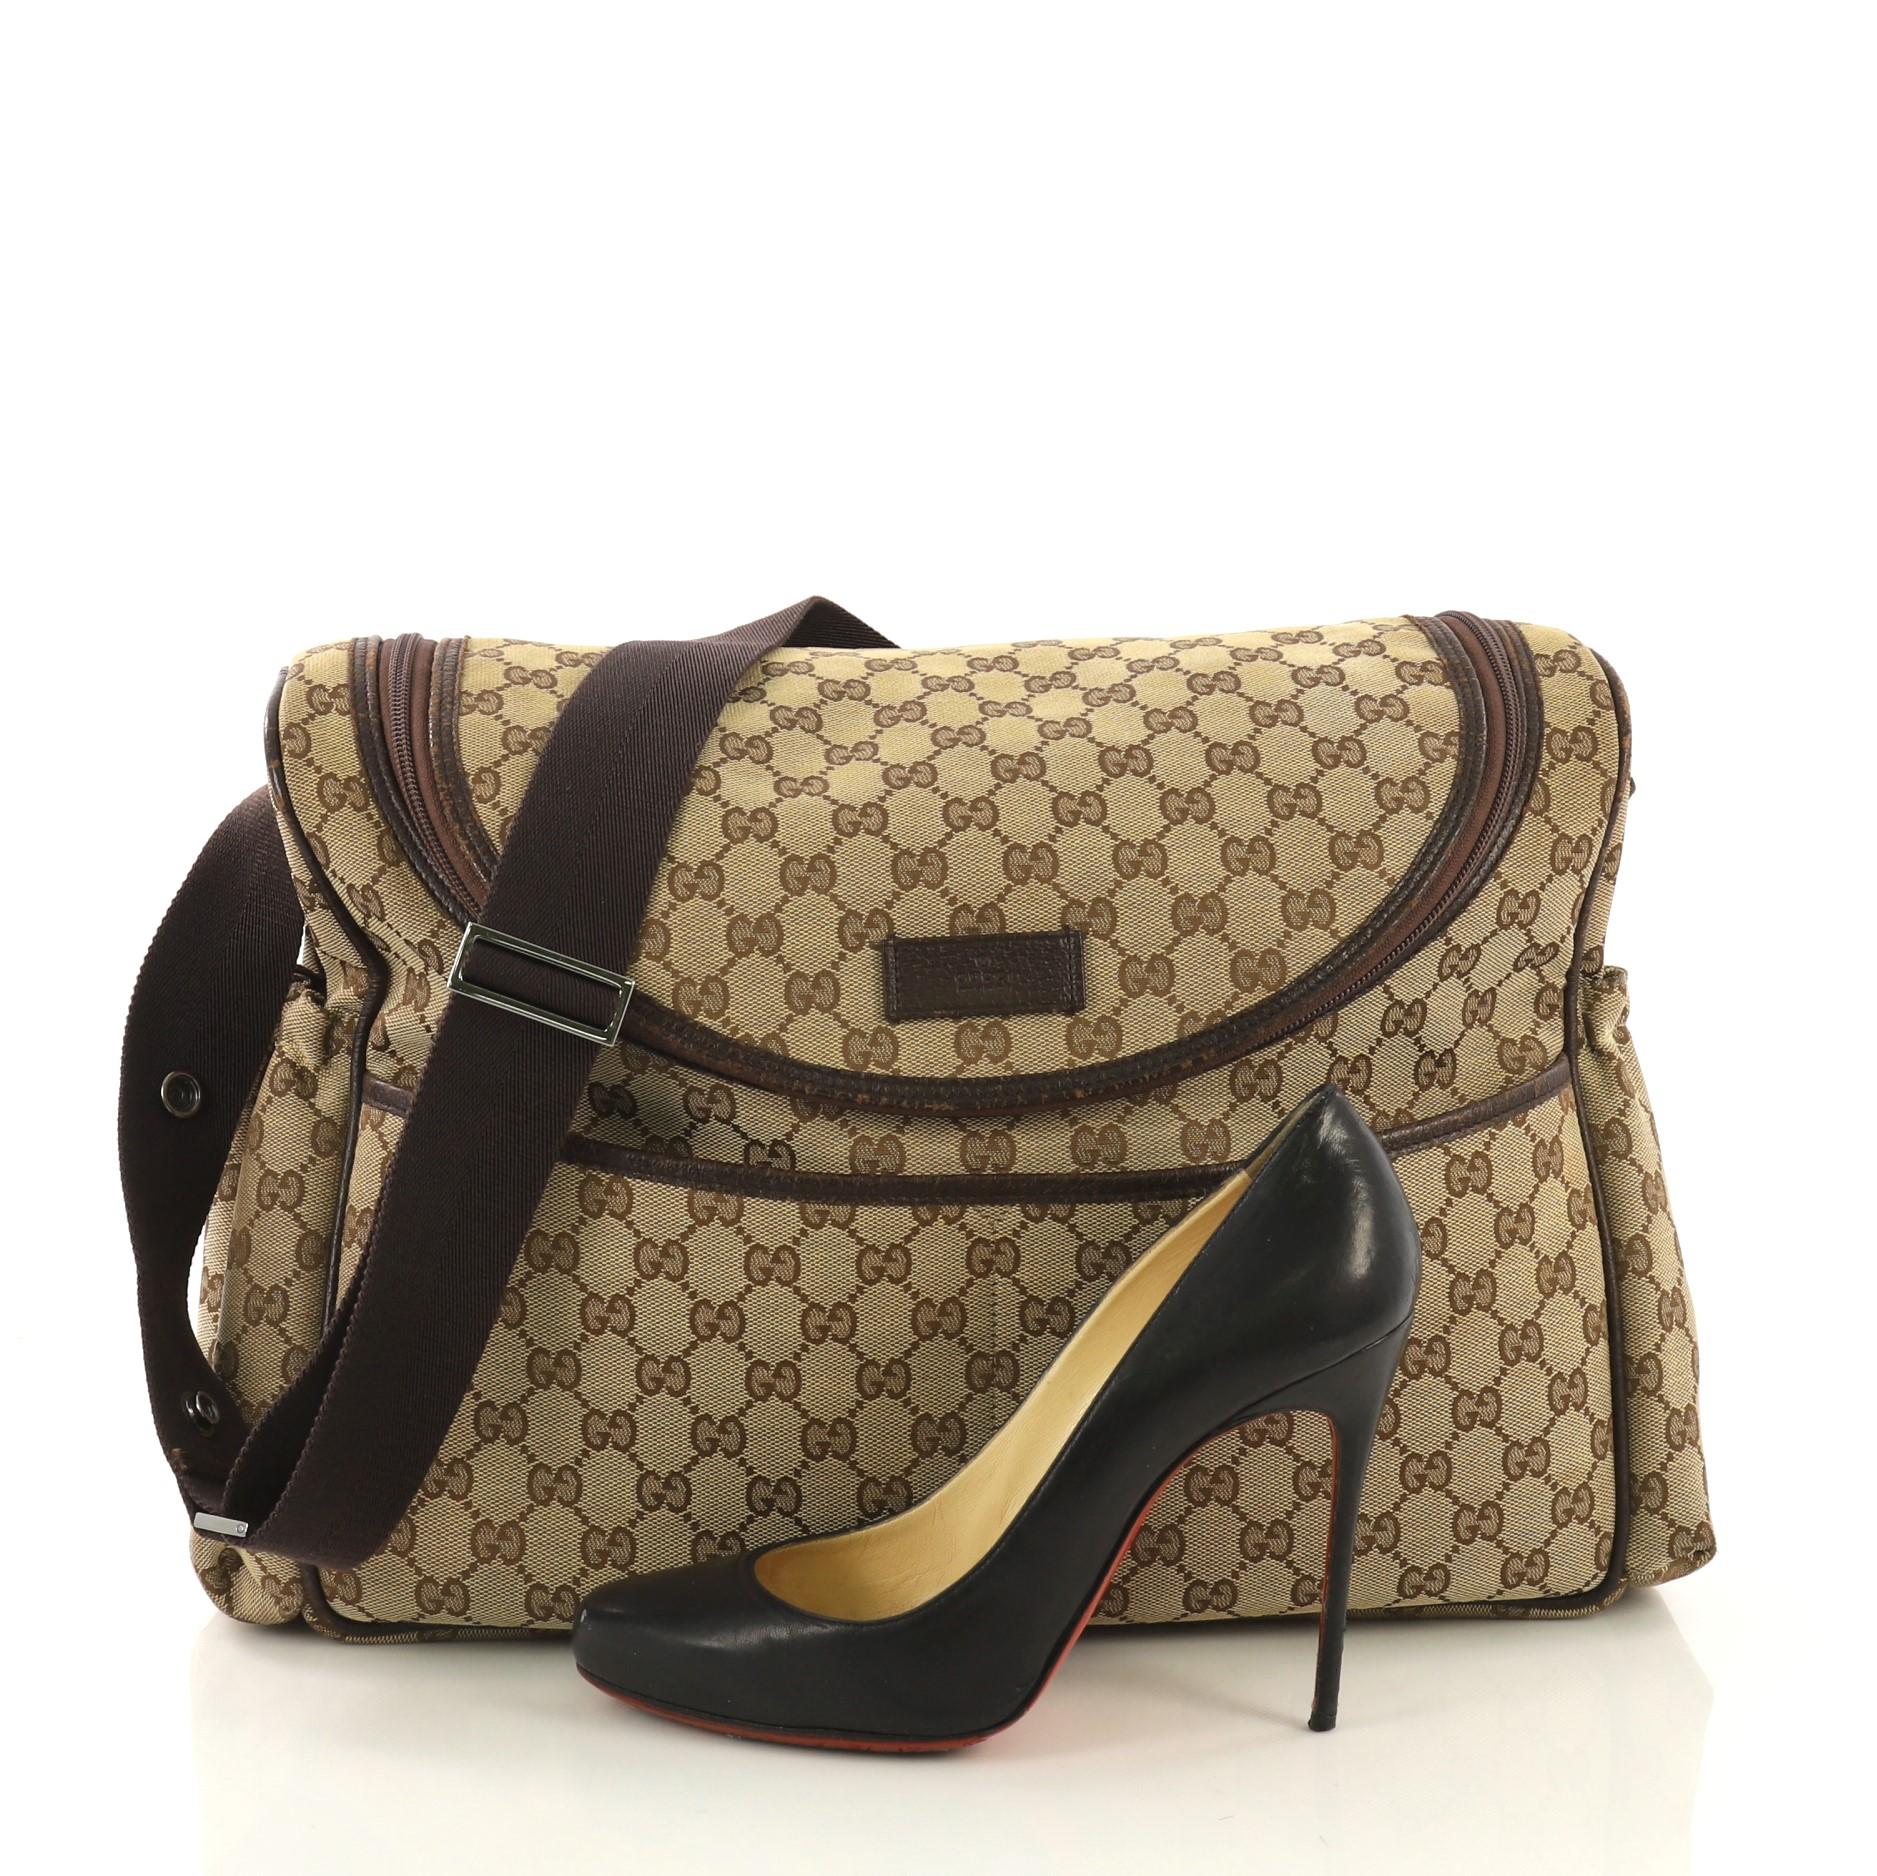 This Gucci Diaper Crossbody Bag GG Canvas, crafted from brown GG canvas, features adjustable shoulder strap, side elastic pockets, two front pockets, leather trim, and gunmetal-tone hardware. Its top zip closure opens to a brown nylon interior with